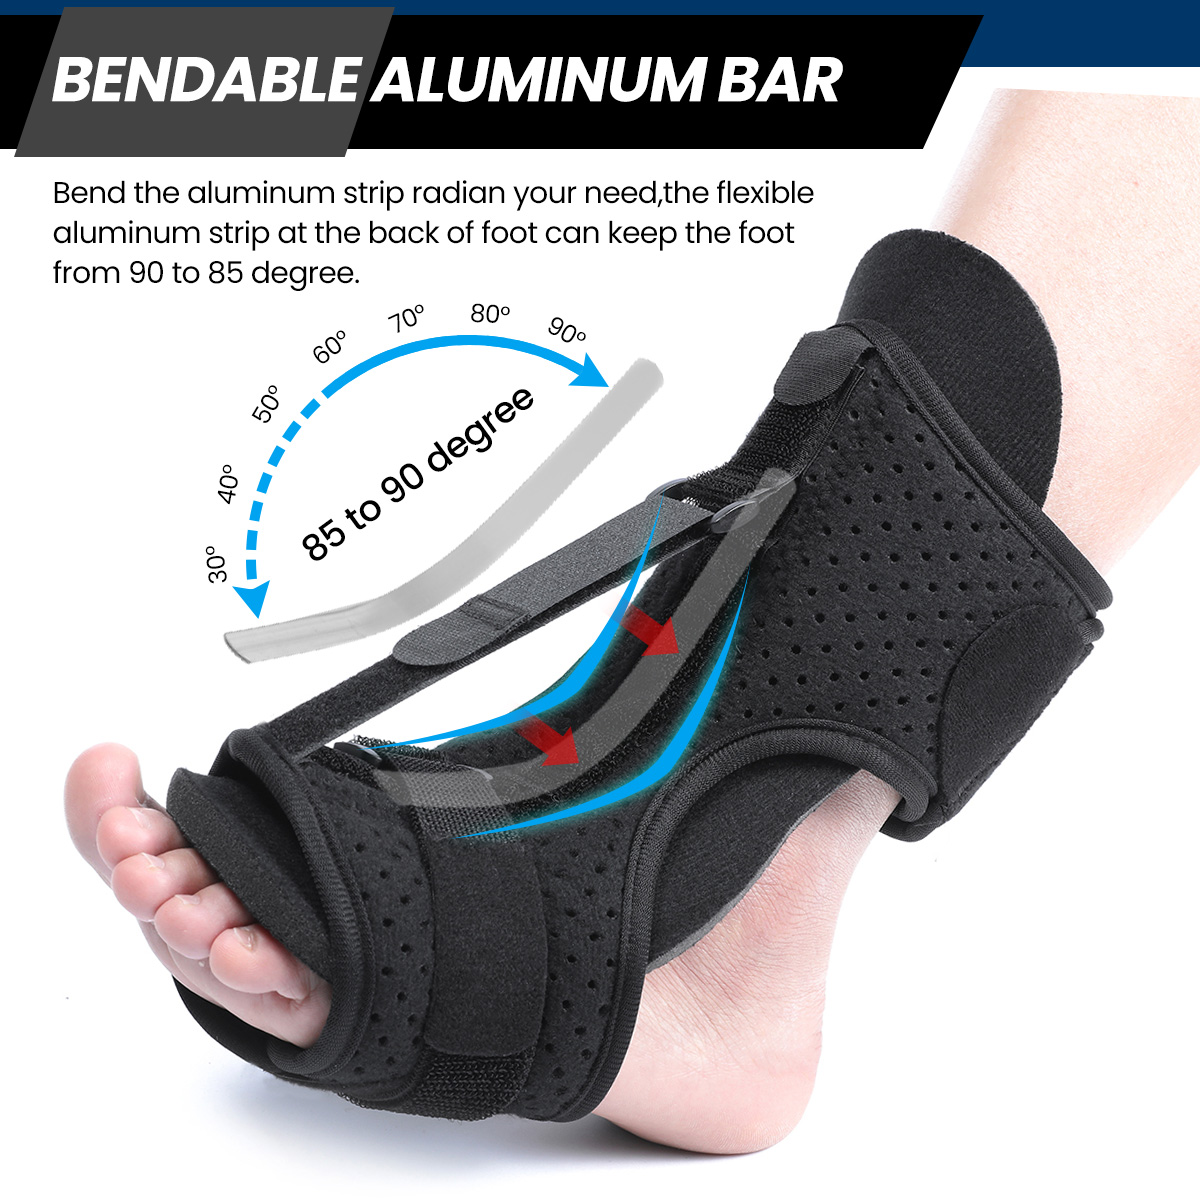 OUTERDO-Foot-Drop-Orthosis-with-Fitness-Ball-Adjustable-Plantar-Fasciitis-Night-Splint-Brace-Support-1891293-2